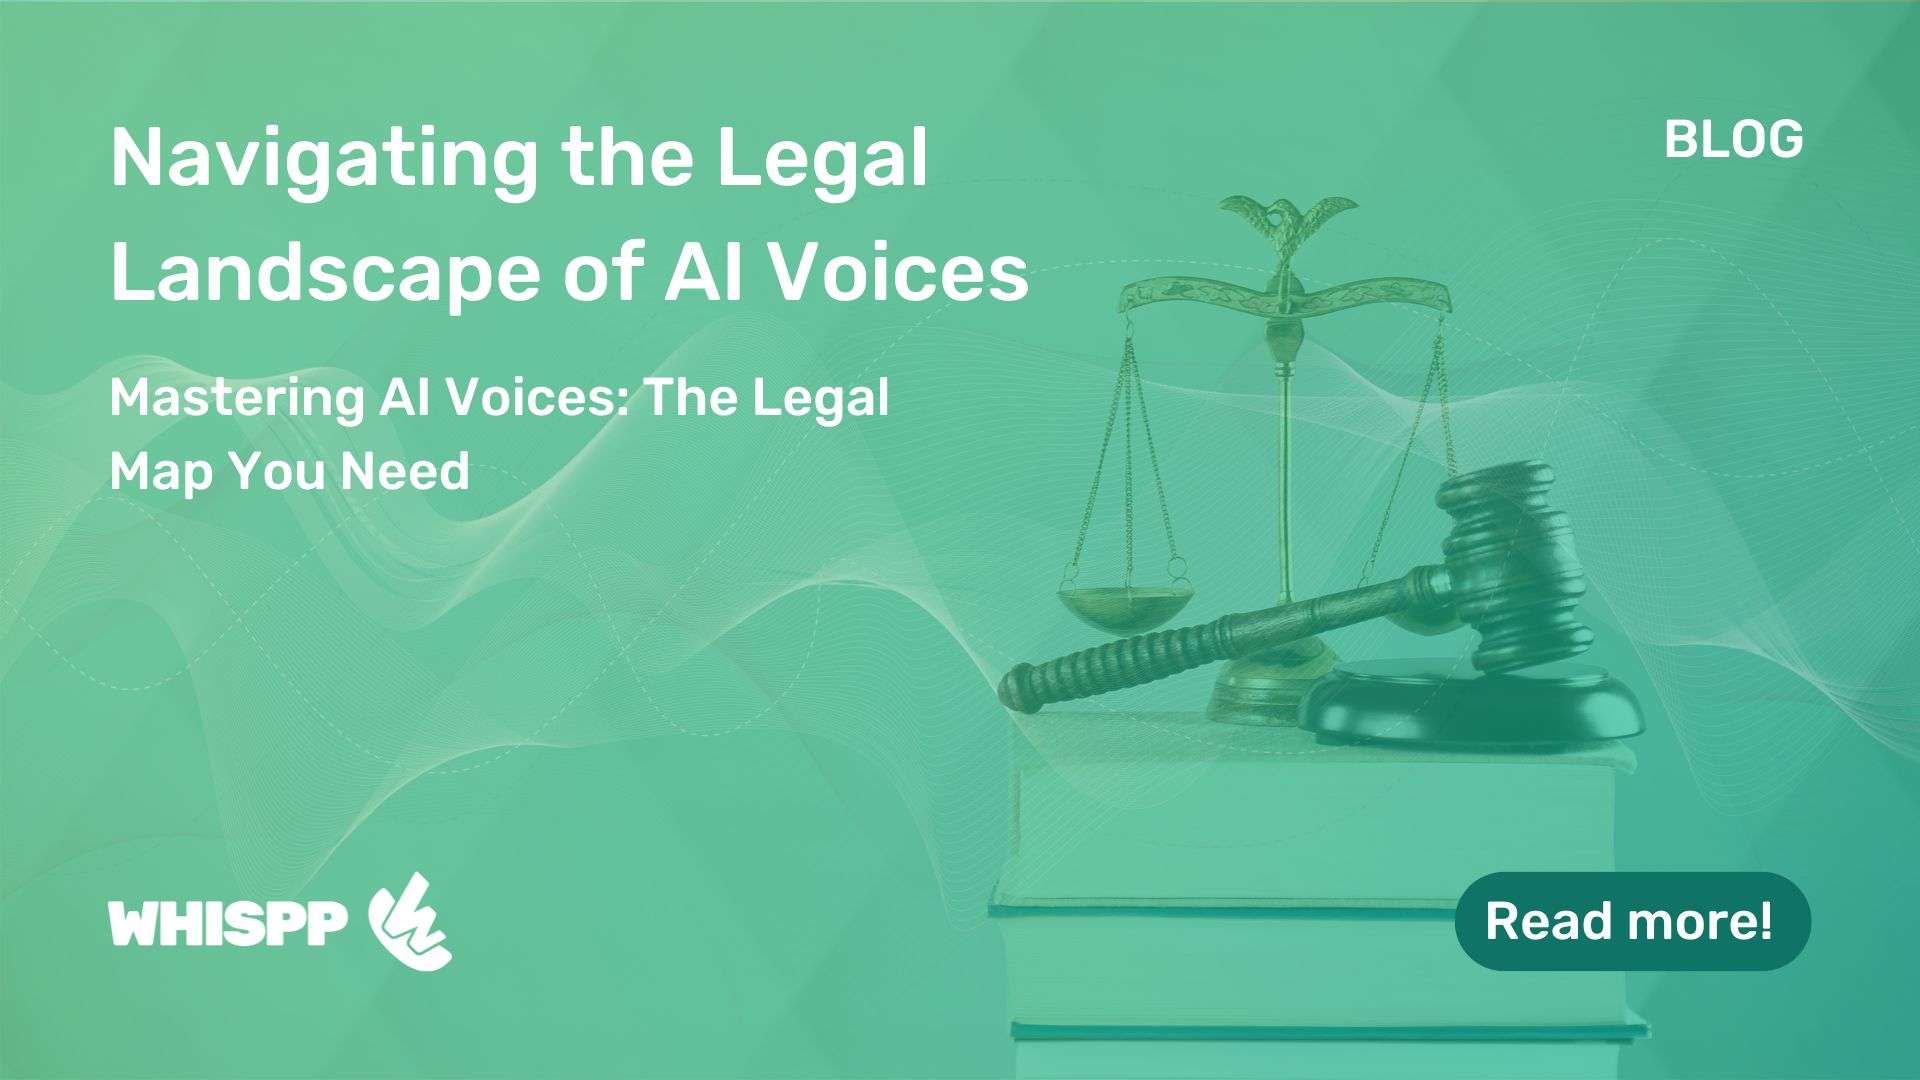 Legal guidebook with AI voice waveforms representing the complexities of AI voice technology laws.